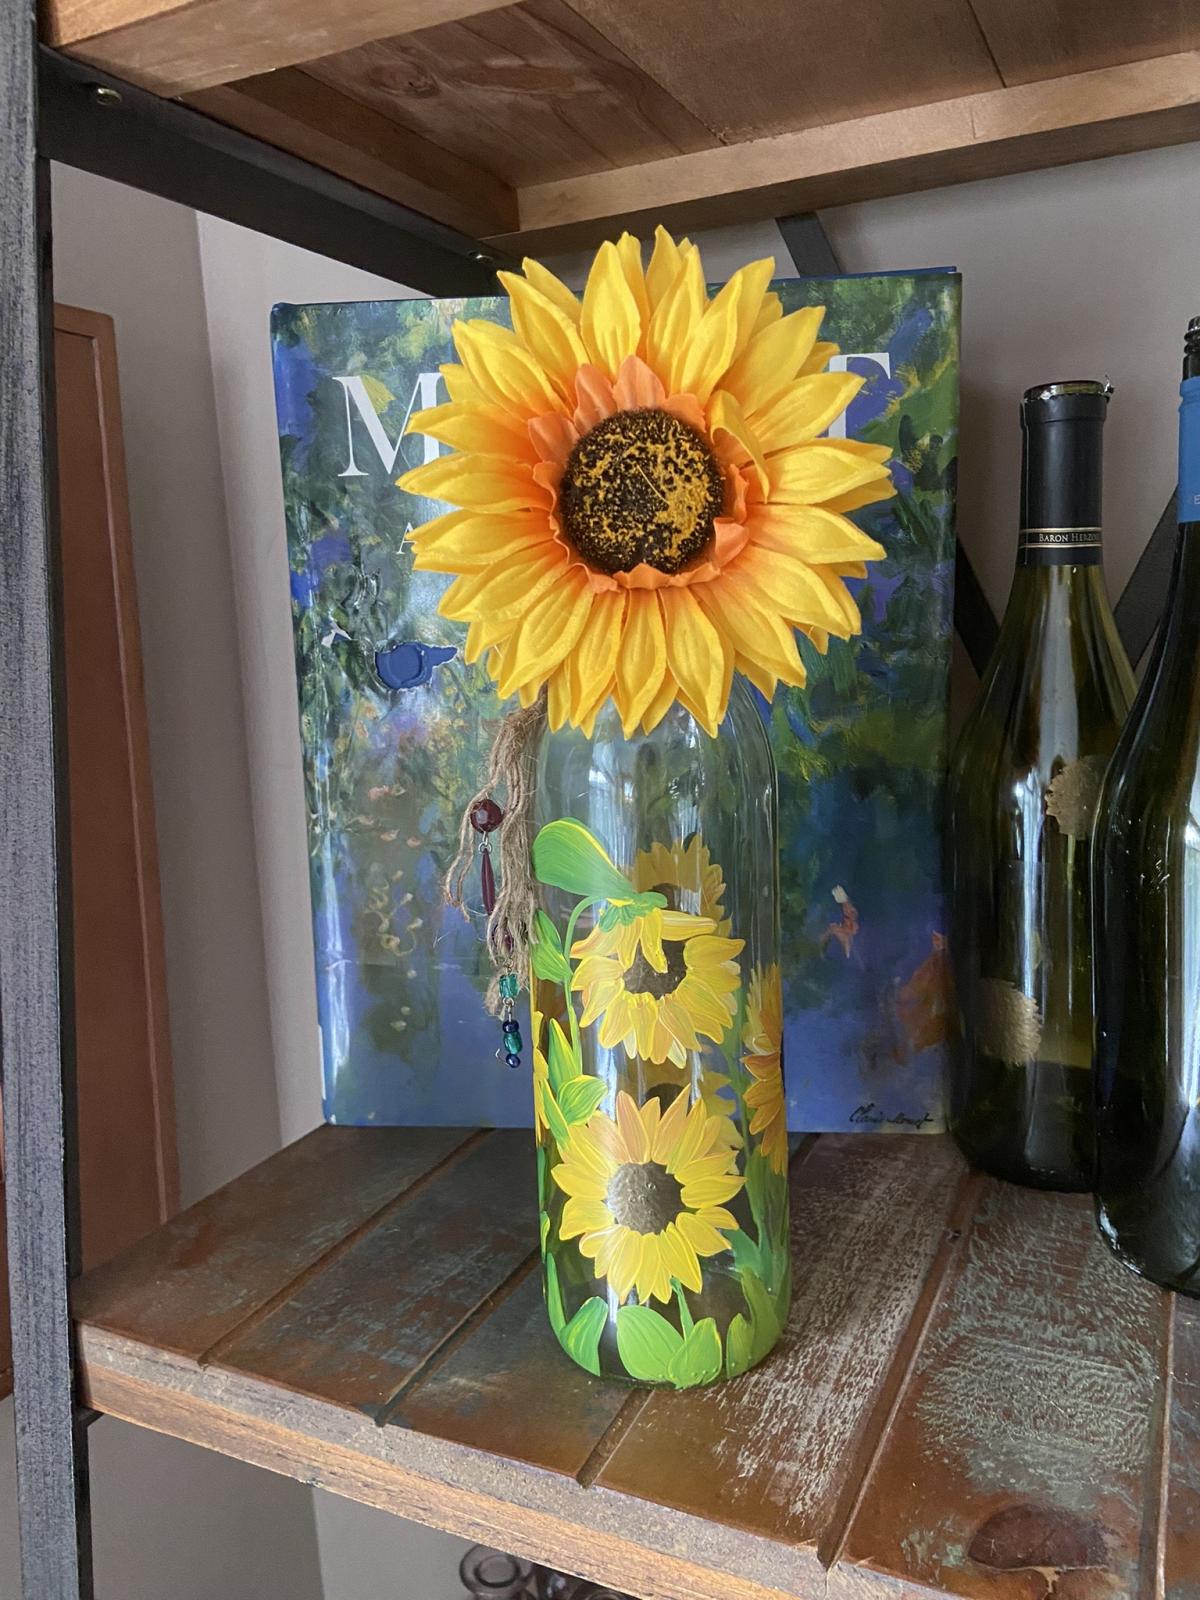 A photo of a bottle painted with sunflowers.